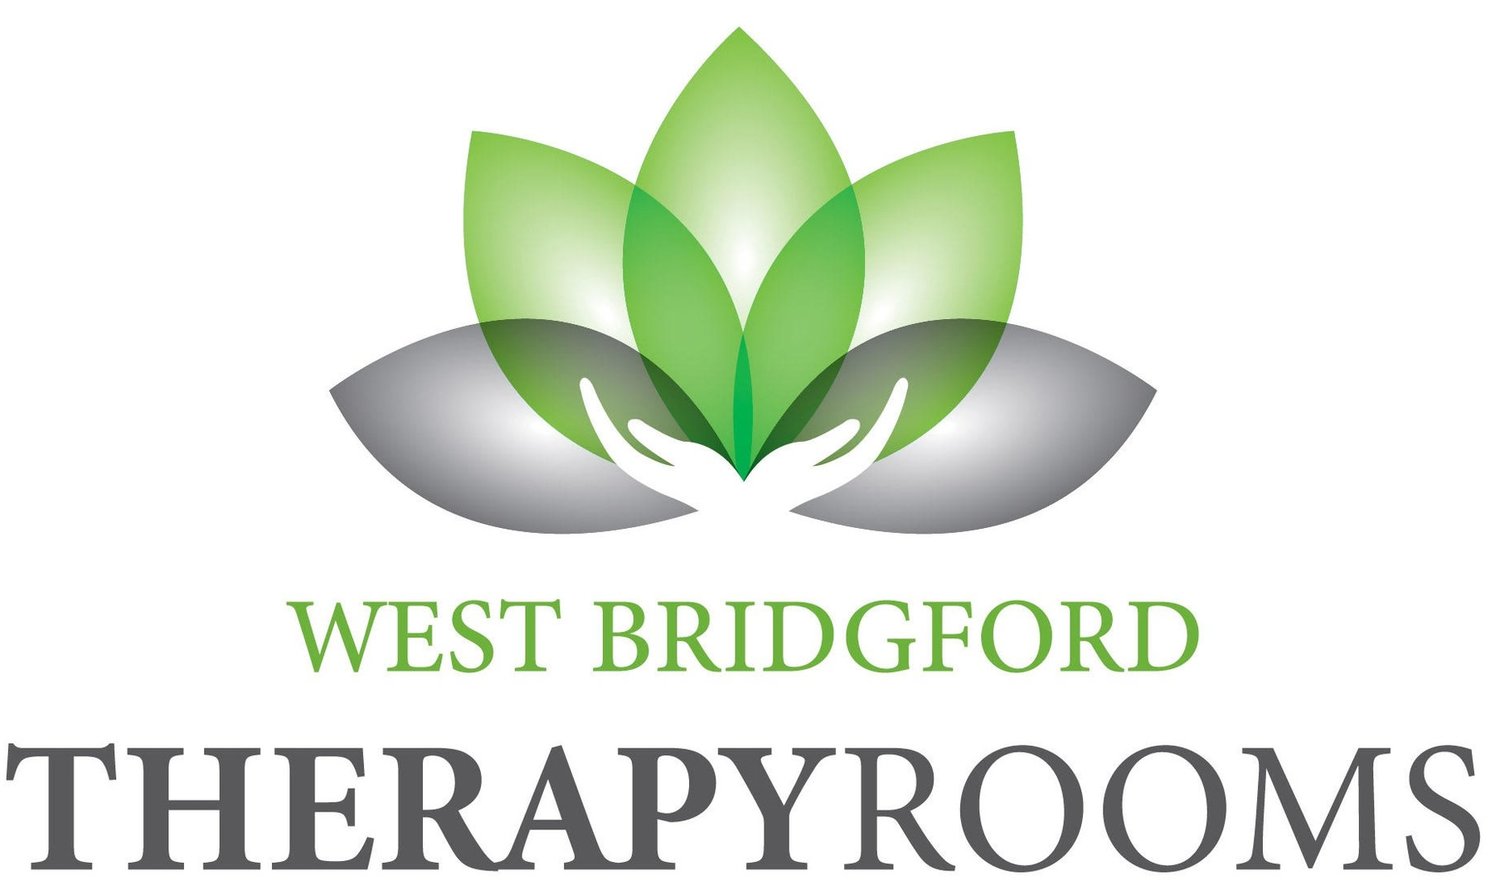 West Bridgford Therapy Rooms